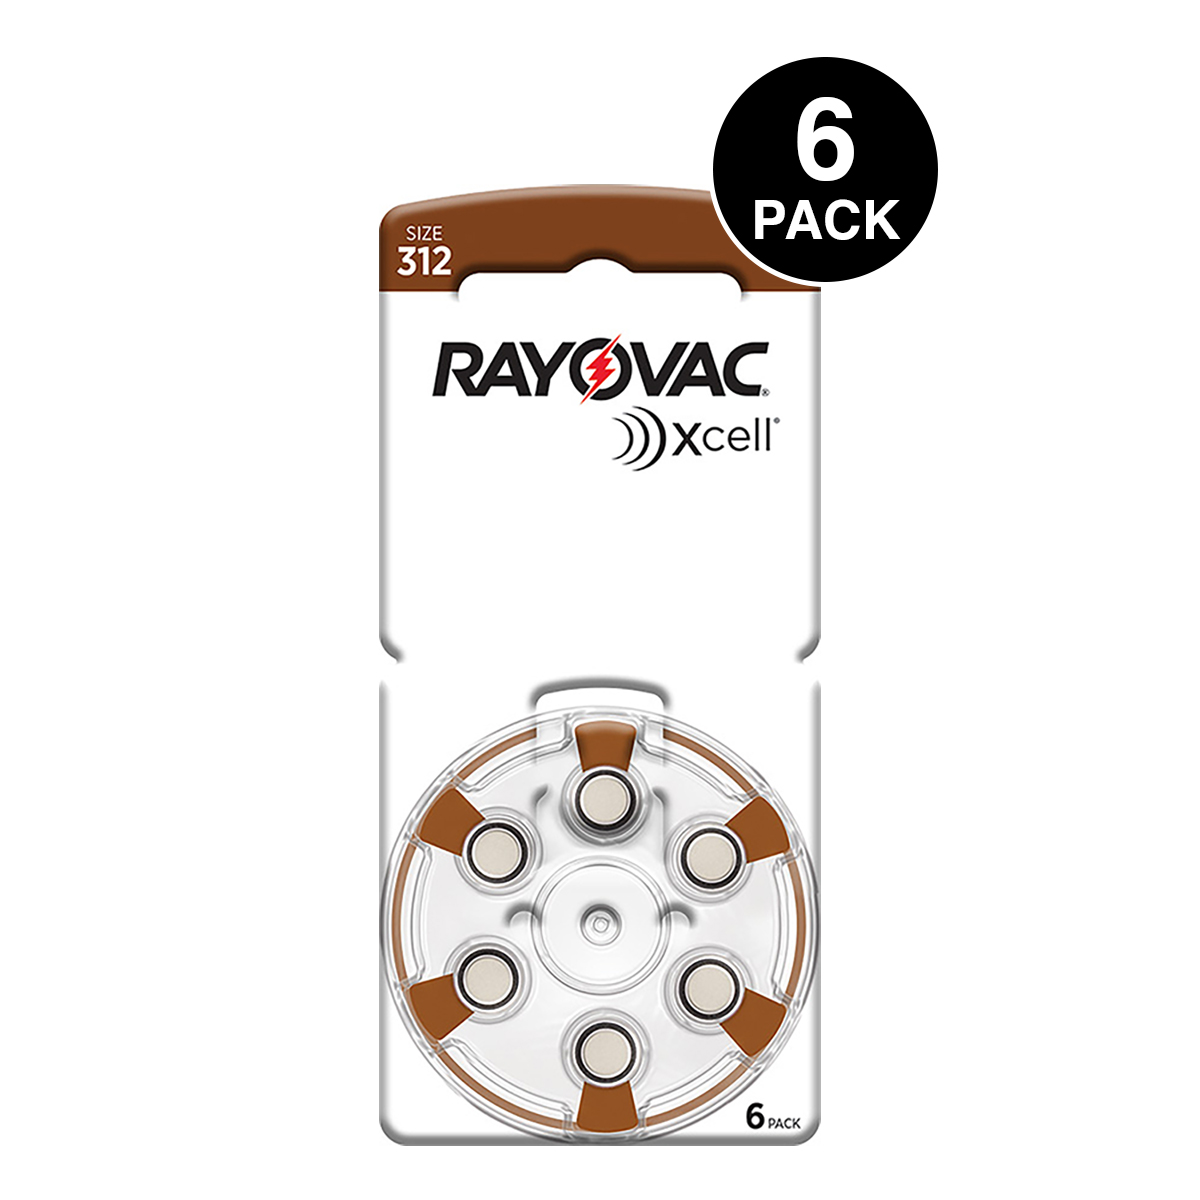 Xcell (Made By Rayovac) Size 312 Hearing Aid Batteries (6 Pcs)